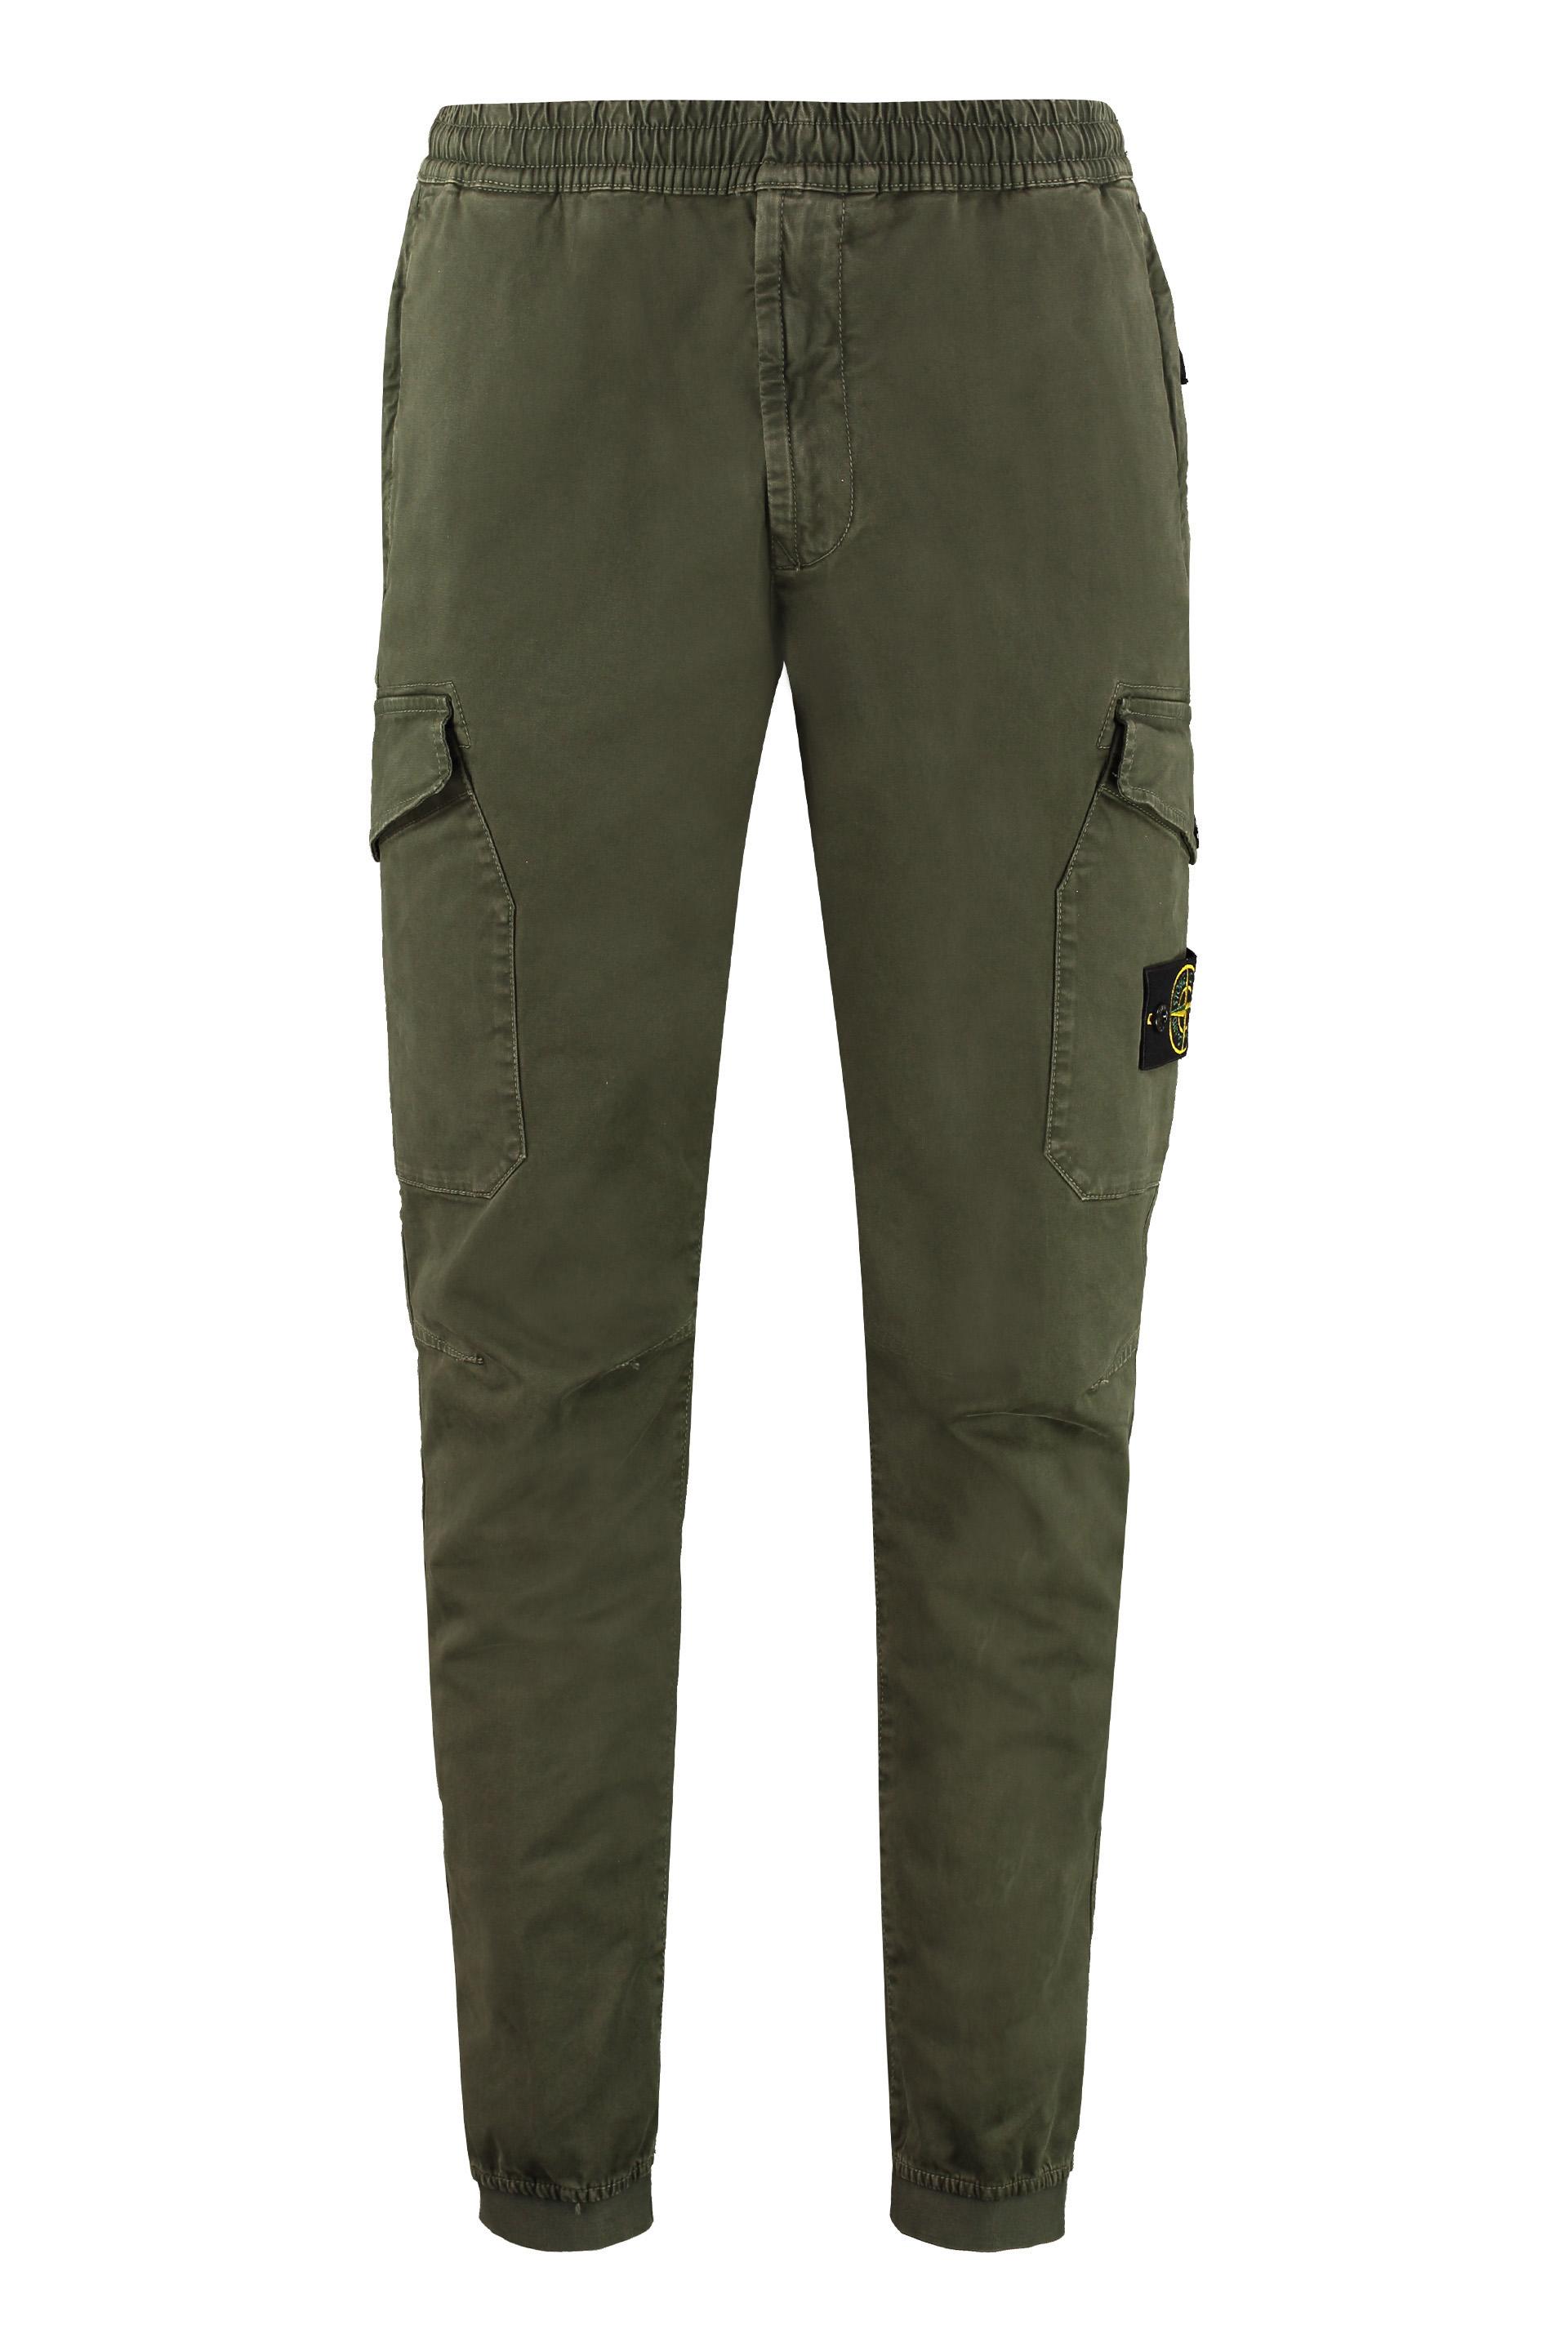 Stone Island Cotton Twill Cargo Pants in Green for Men - Lyst